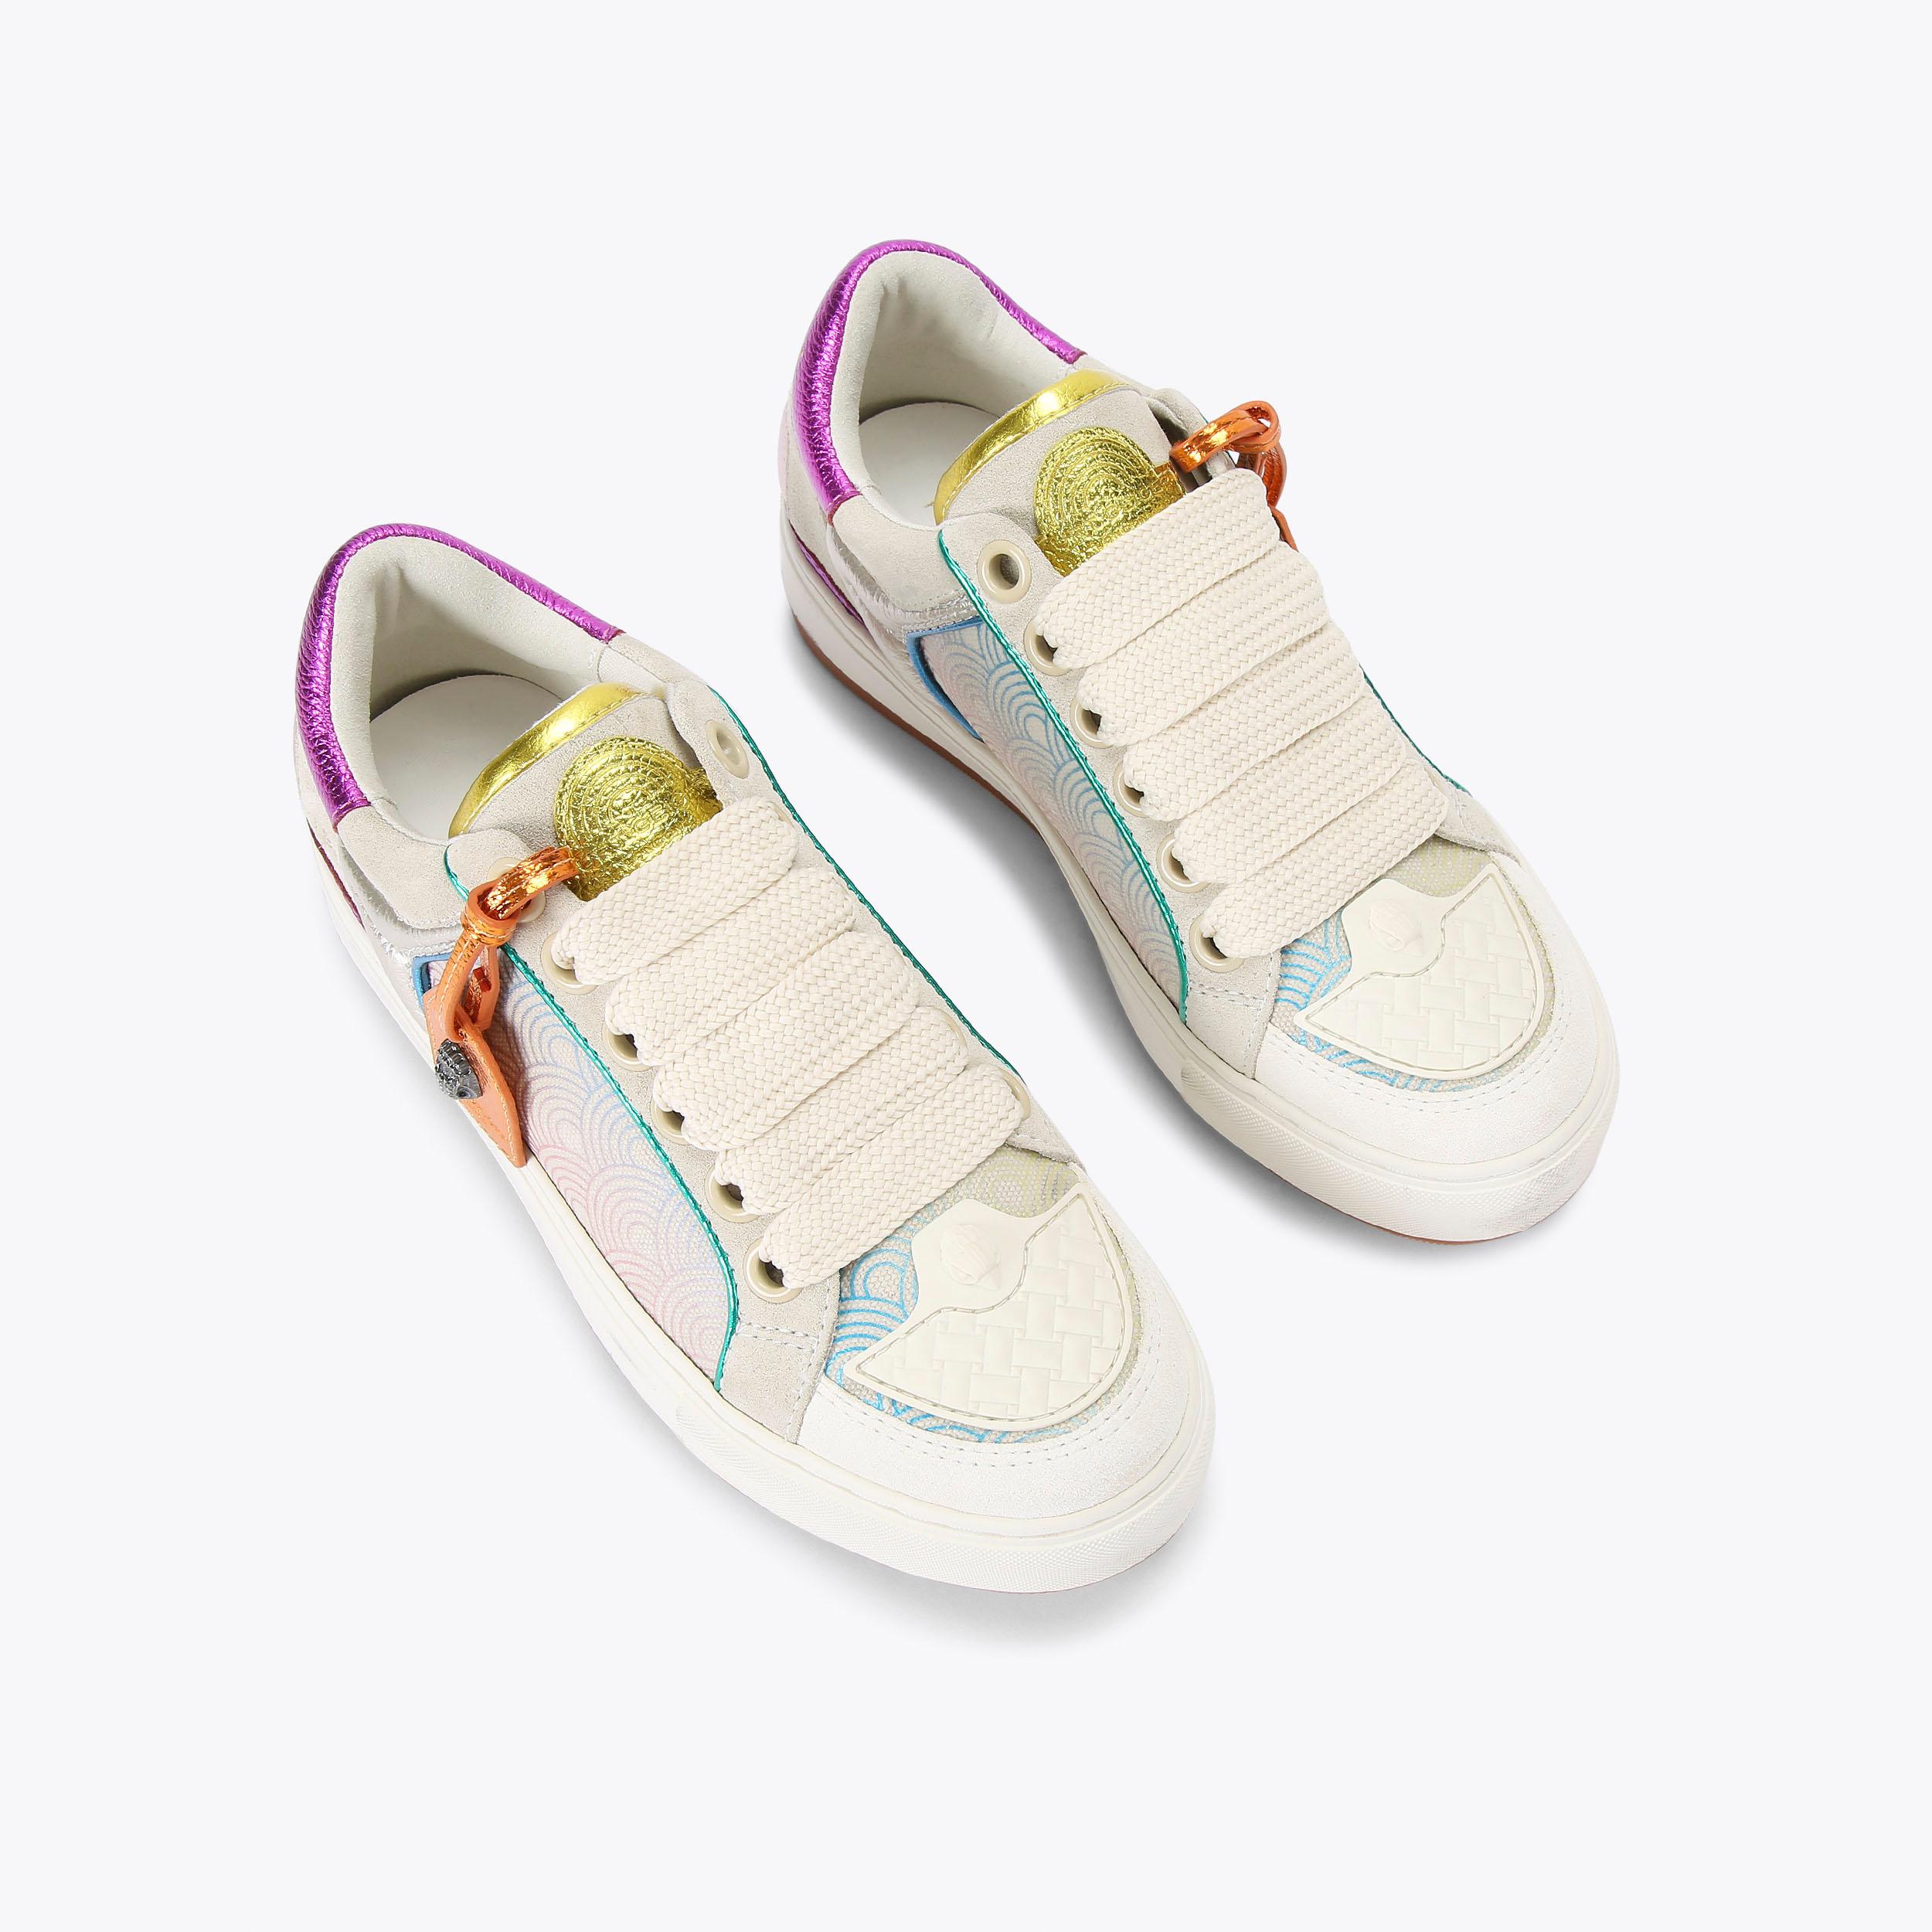 SOUTHBANK TAG Cream Lace Up Sneaker by KURT GEIGER LONDON